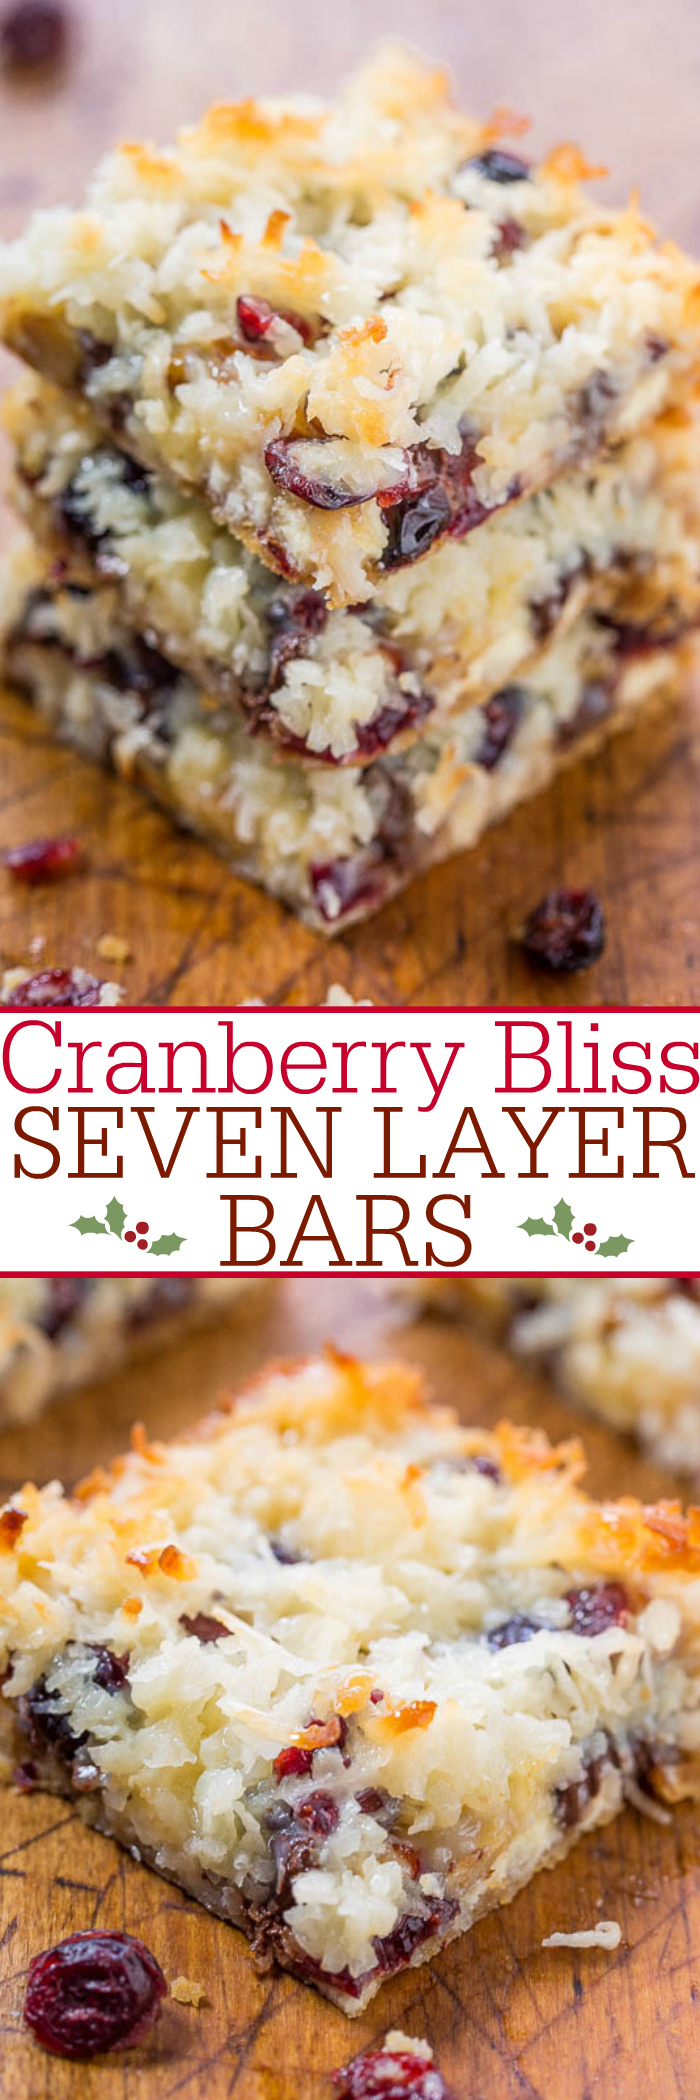 Cranberry Bliss Seven Layer Bars - A marriage of the famous Starbucks Cranberry Bliss Bars with Seven Layer Bars!! White chocolate, cranberries, coconut, and so good! Fast and super easy!!